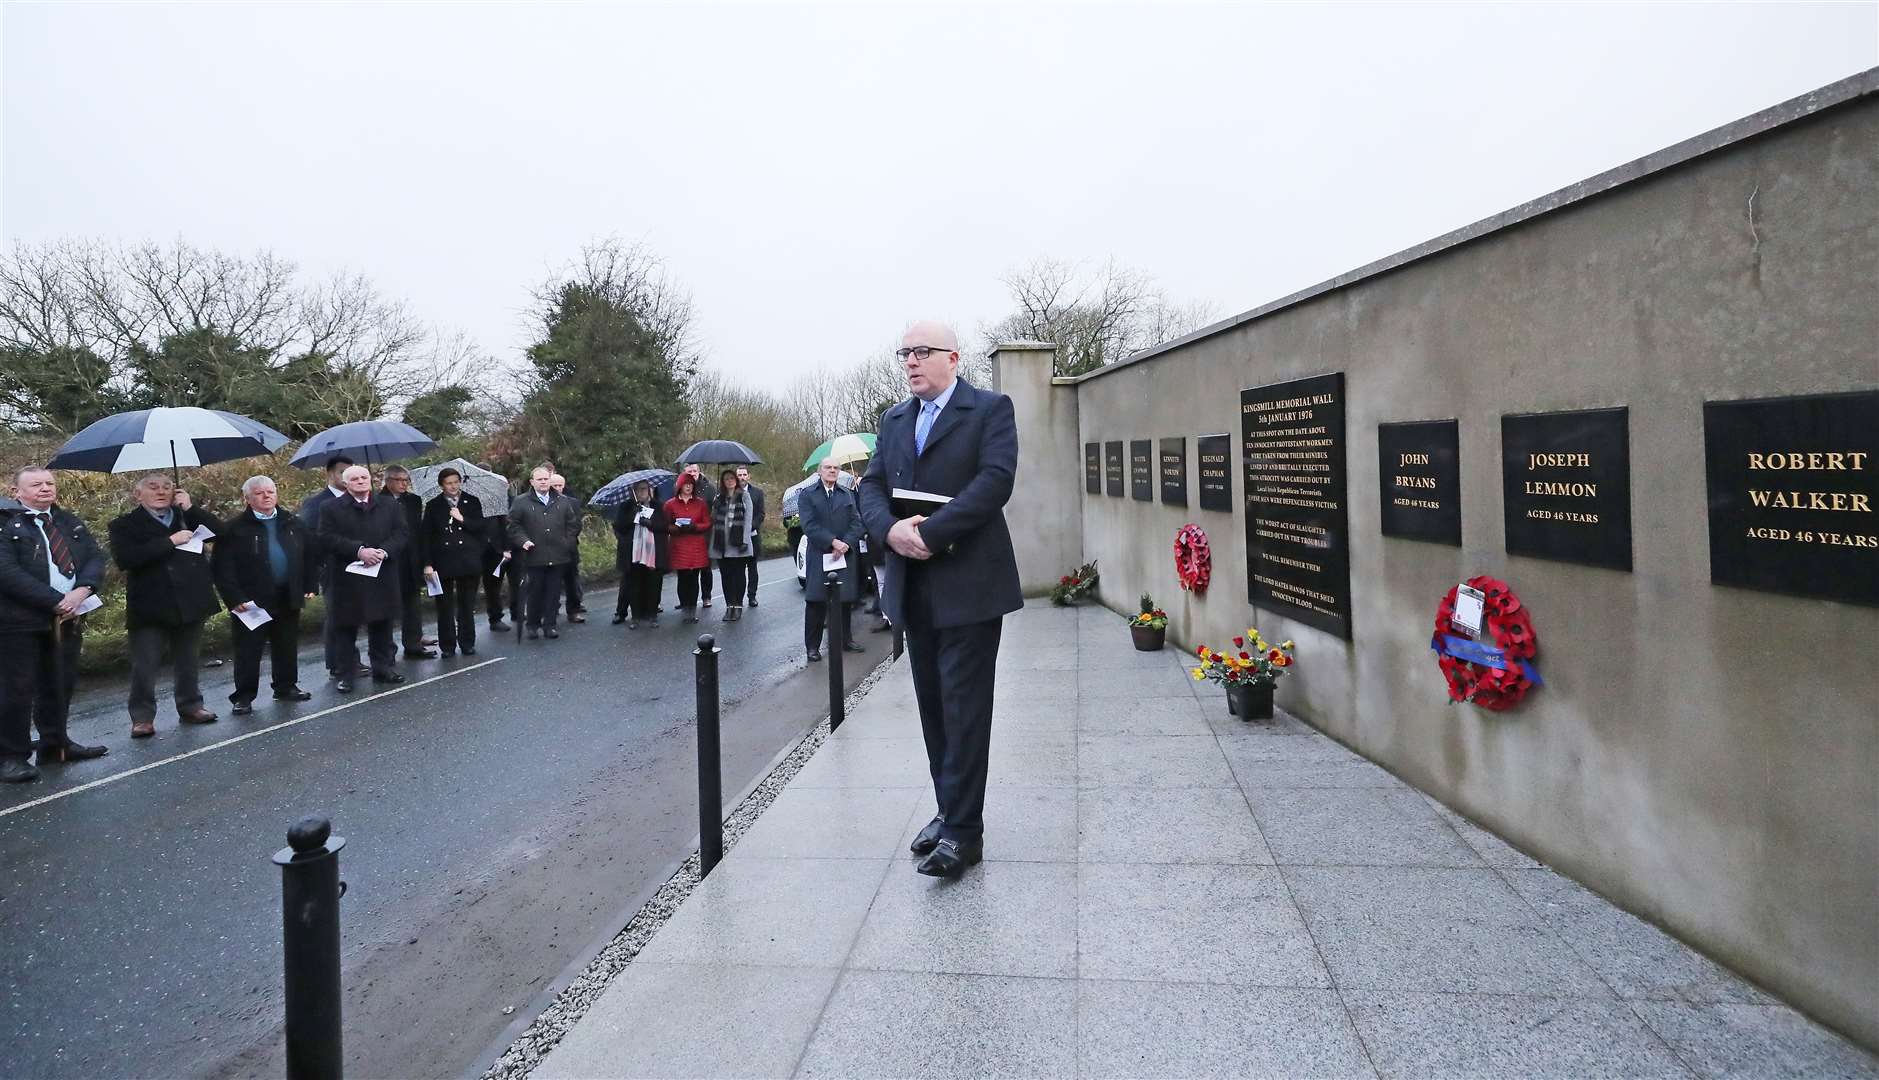 A memorial service at the scene of the atrocity in Co Armagh (PA)